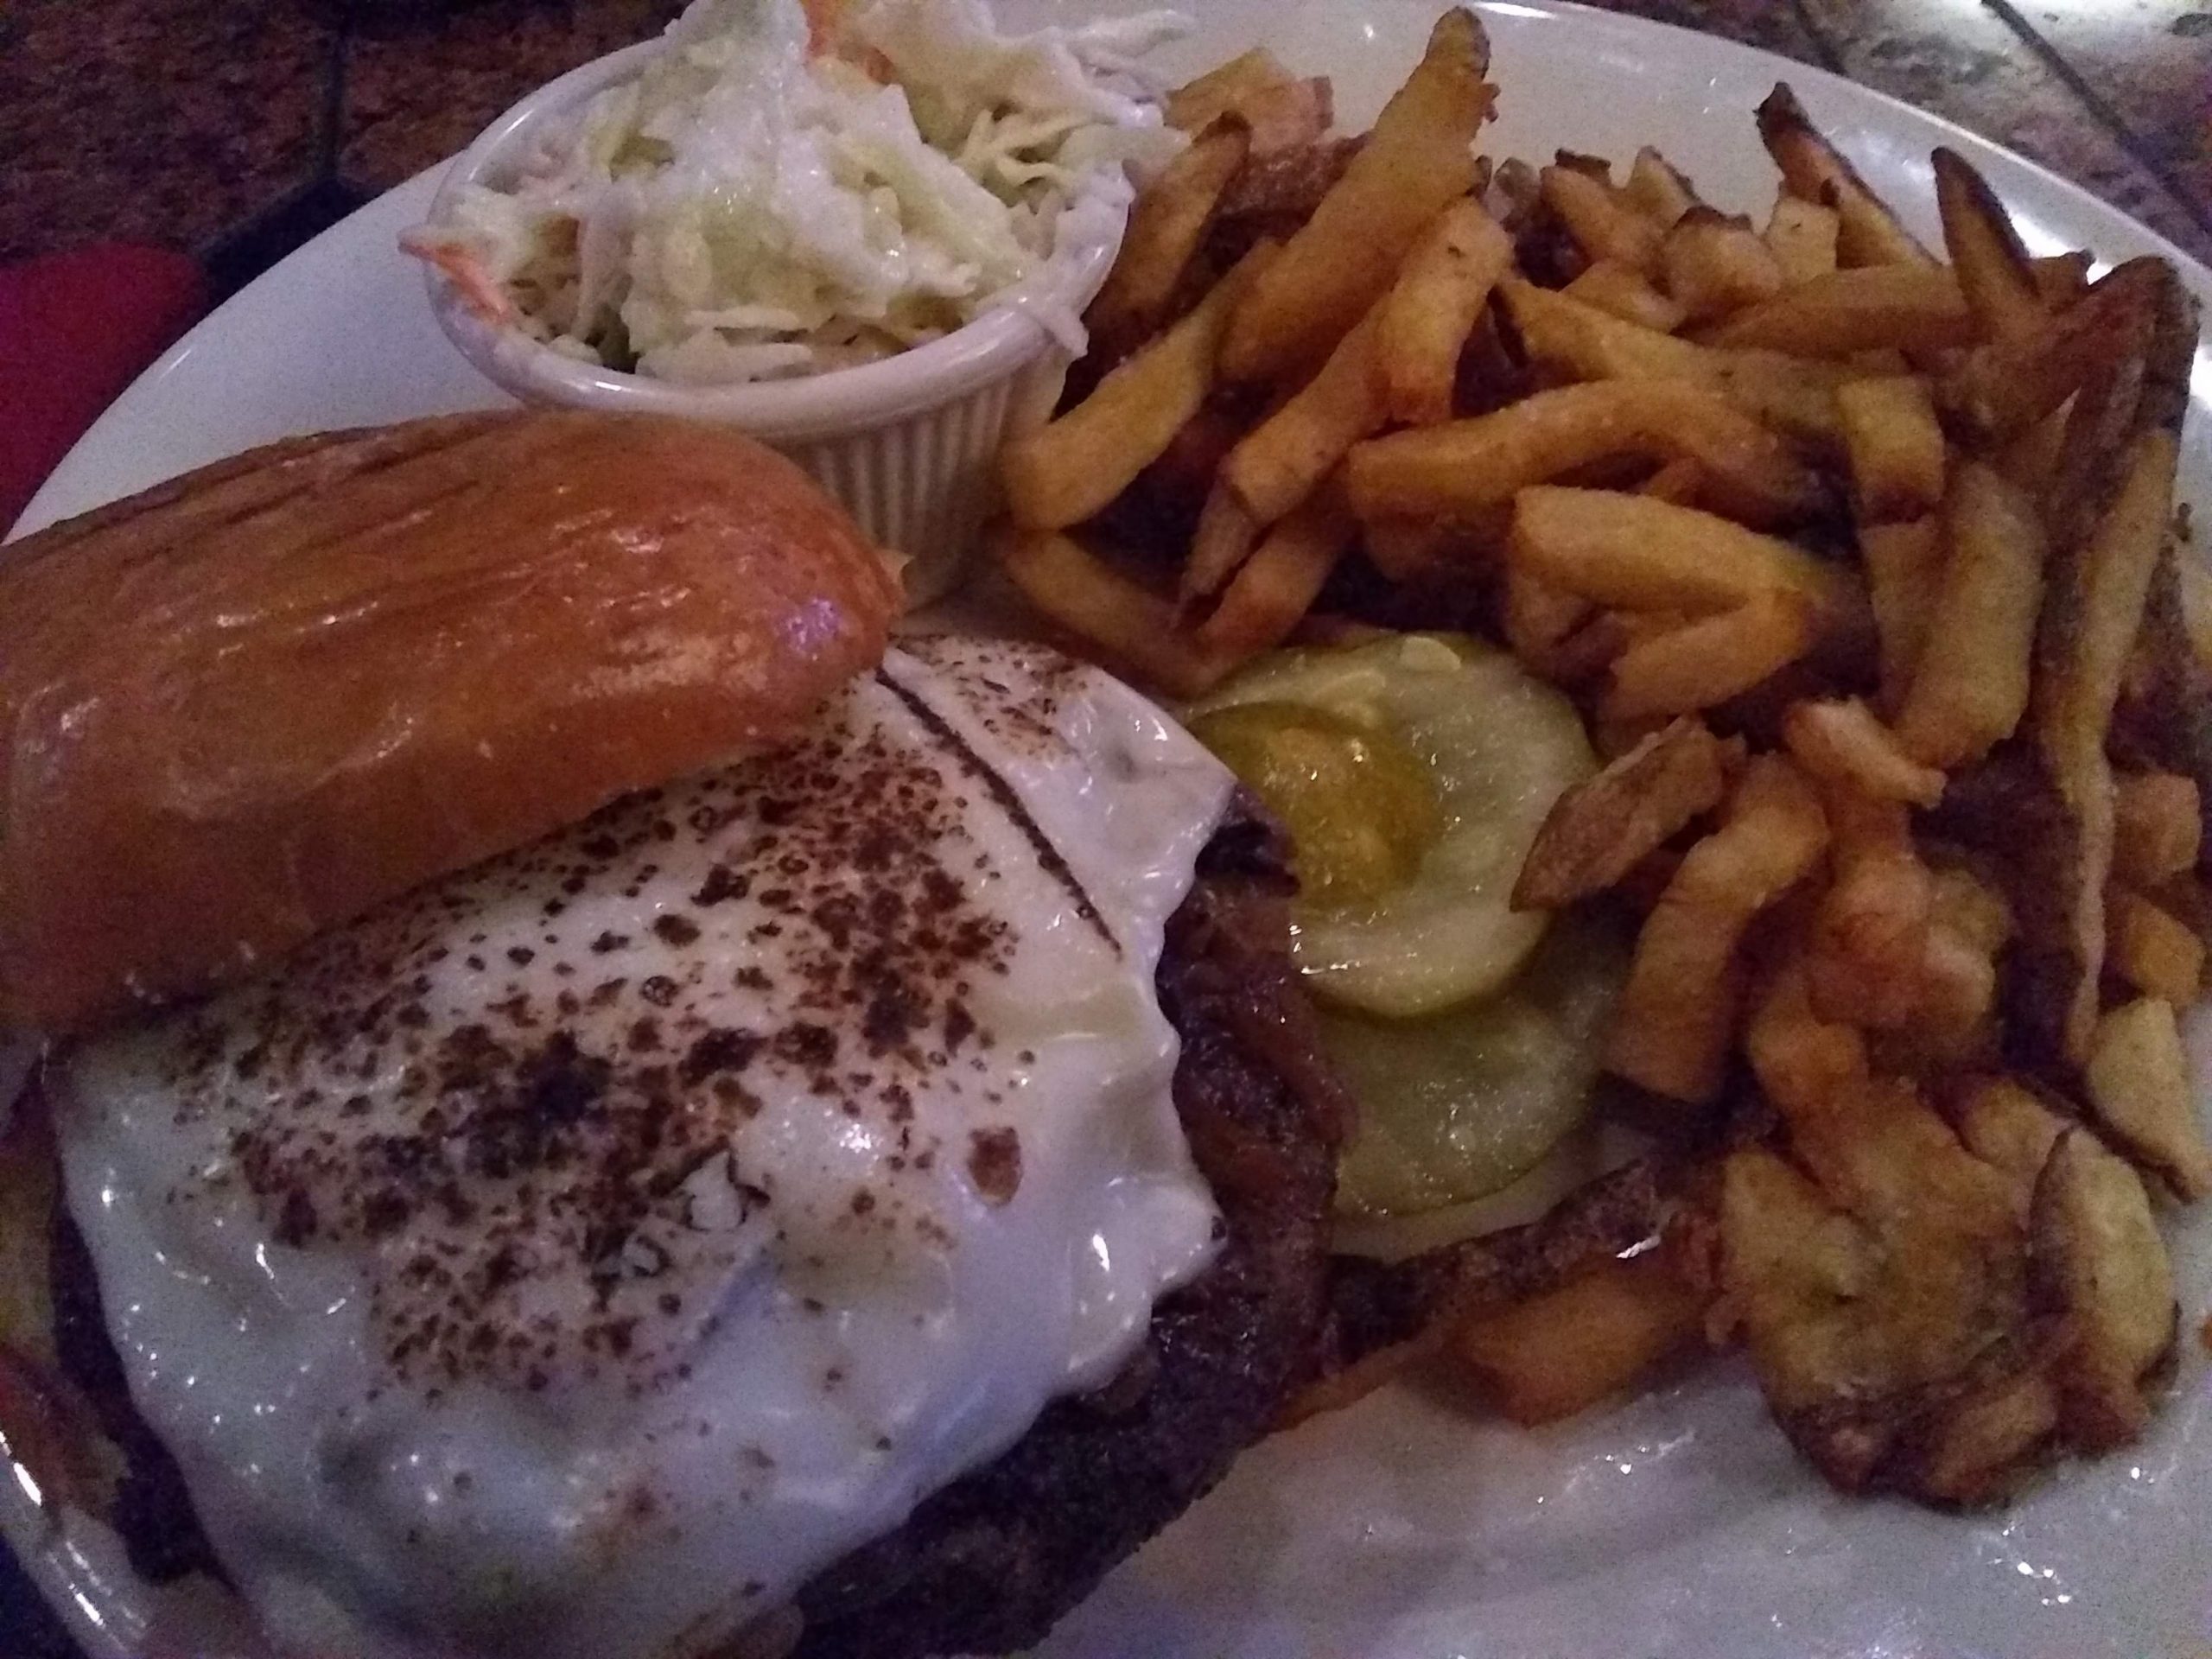 A burger with fries and coleslaw on a plate.